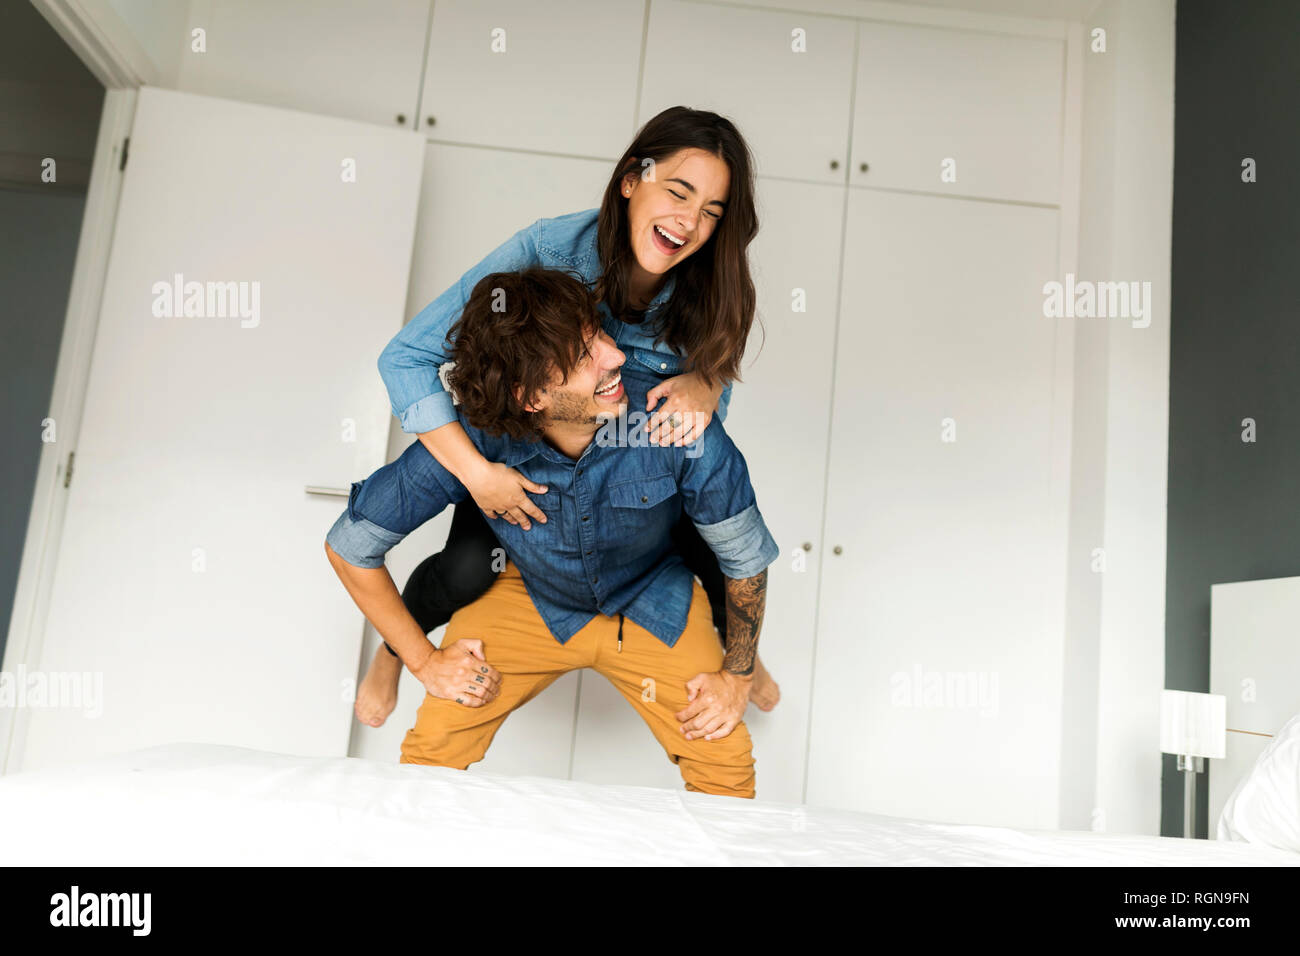 Cheerful man carrying girlfriend piggyback in bedroom at home Stock Photo